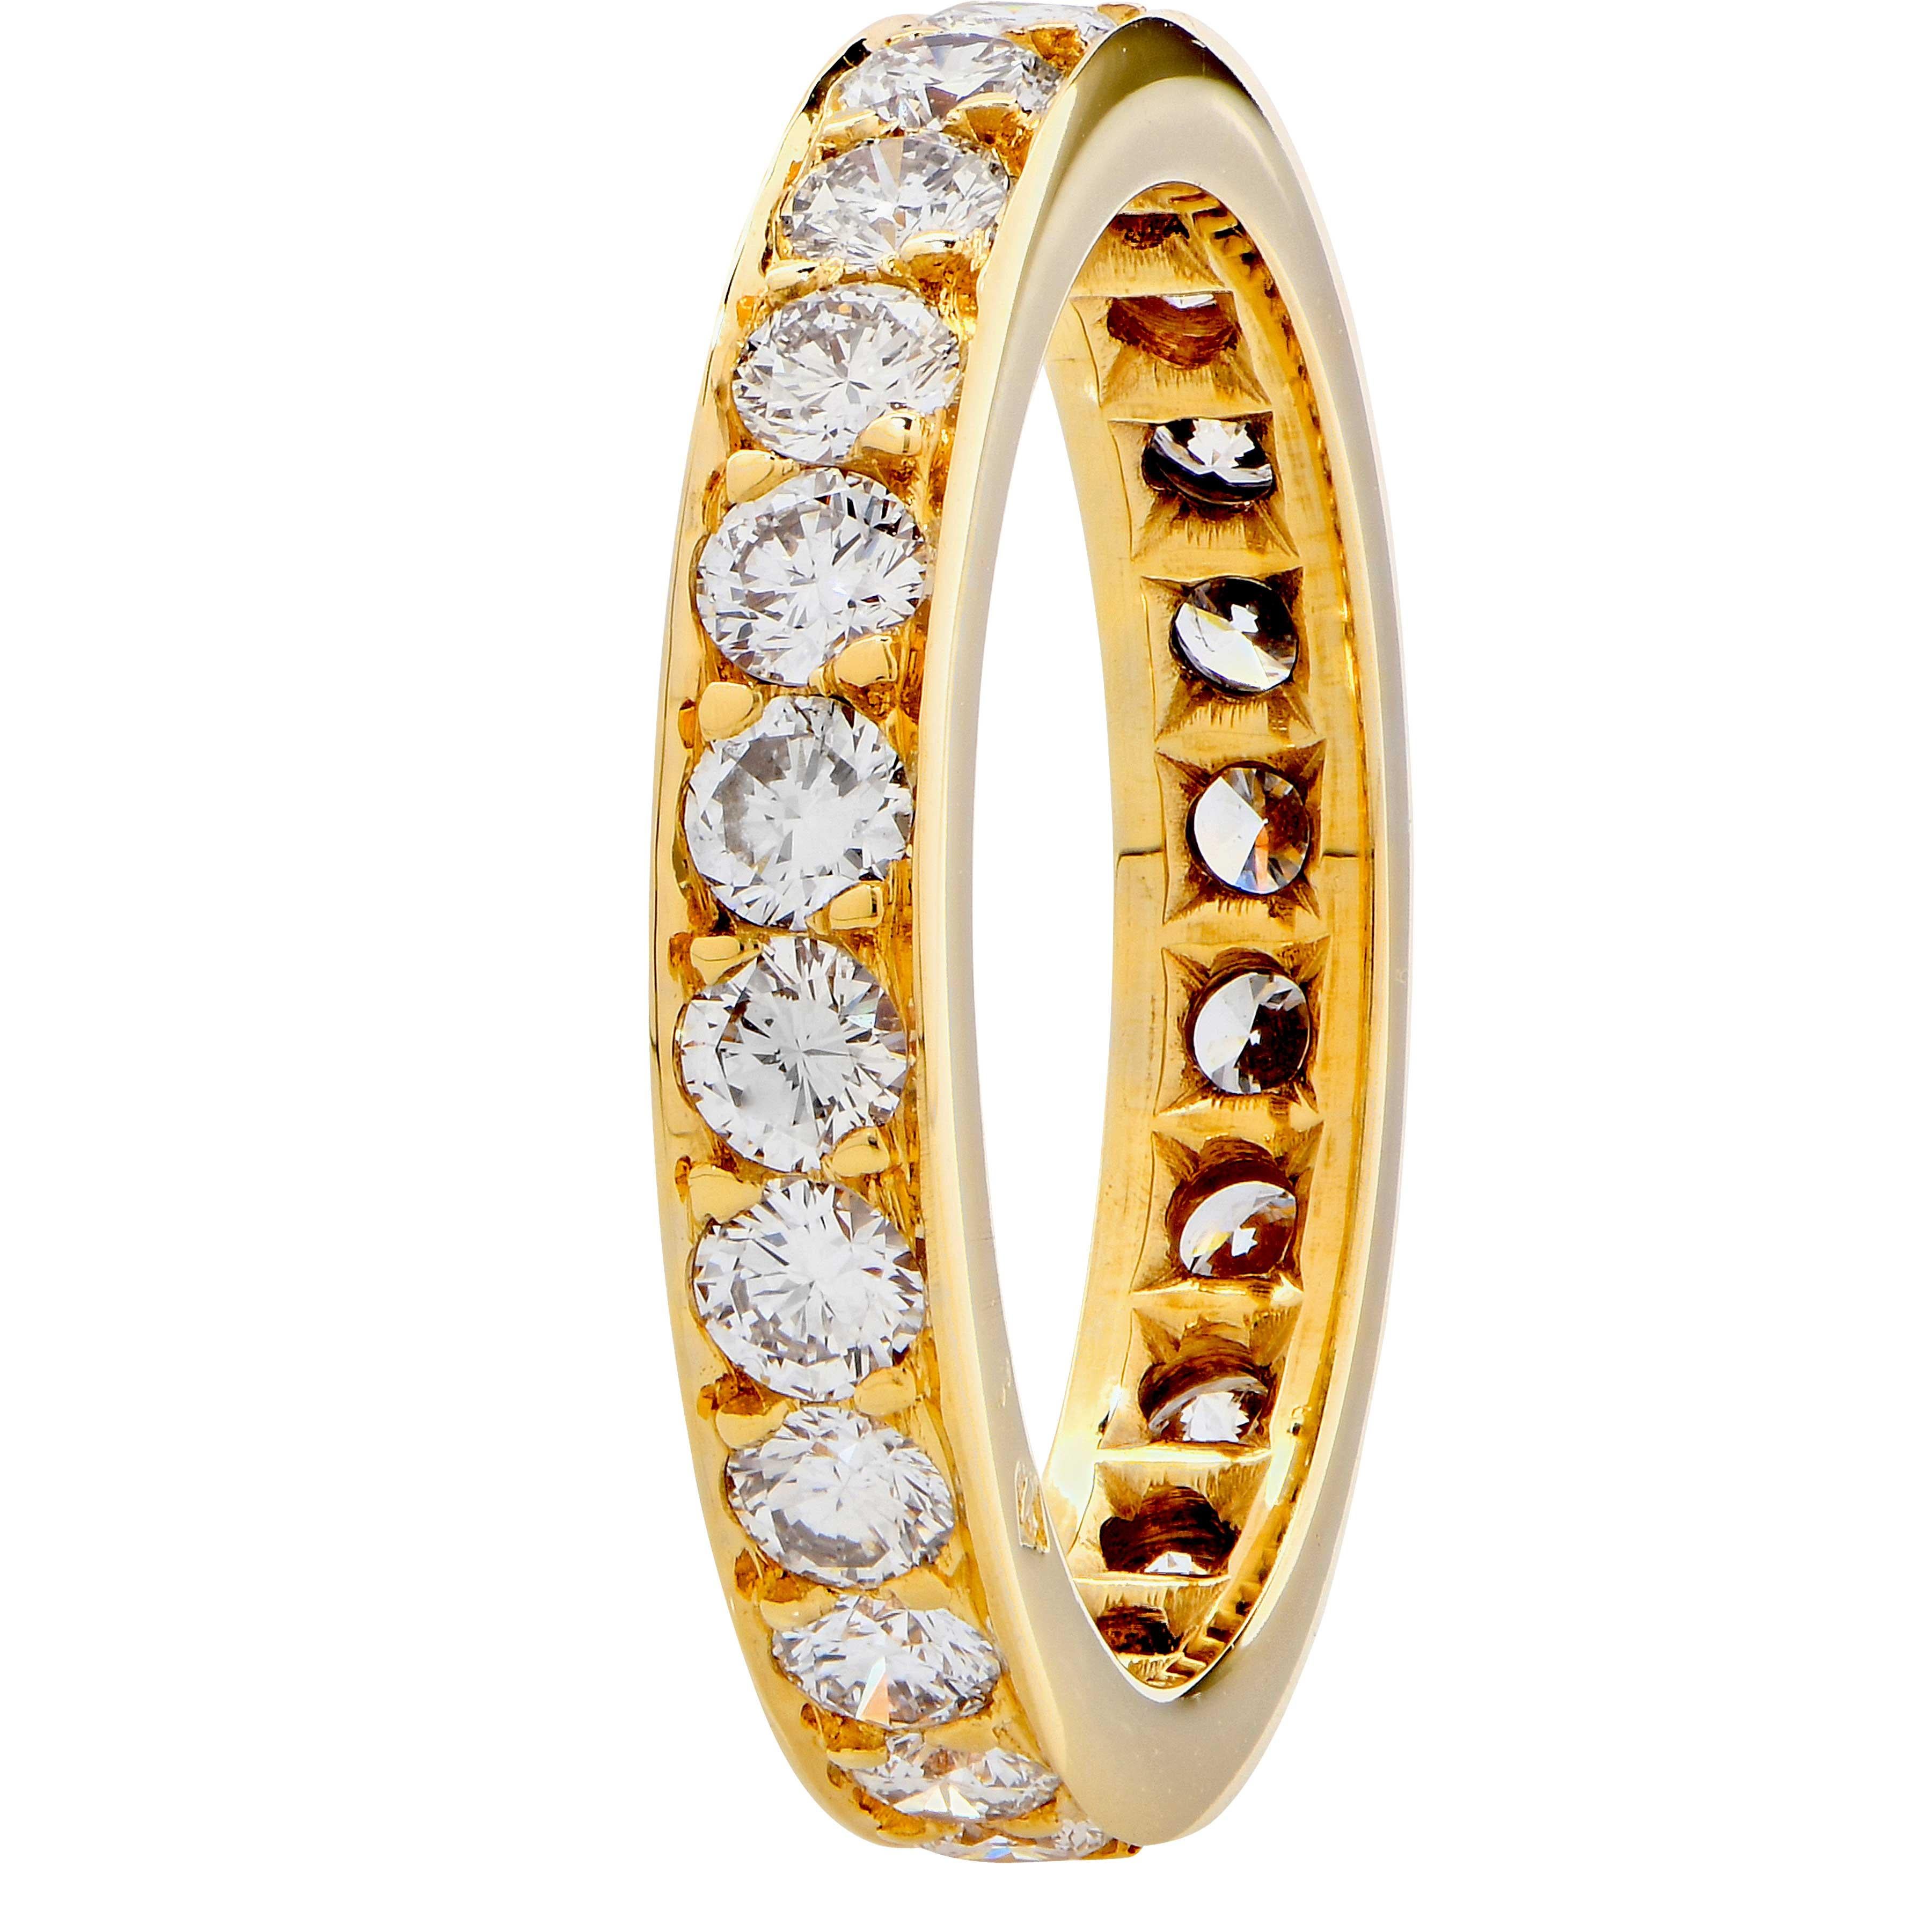 18 Karat Yellow Gold Eternity Band features 24 Round Brilliant Cut Diamonds I Color VS Clarity with an estimated total weight of 1.7 carats.
French Hallmarks
Ring Size: 6
Metal Weight: 3.9 Grams